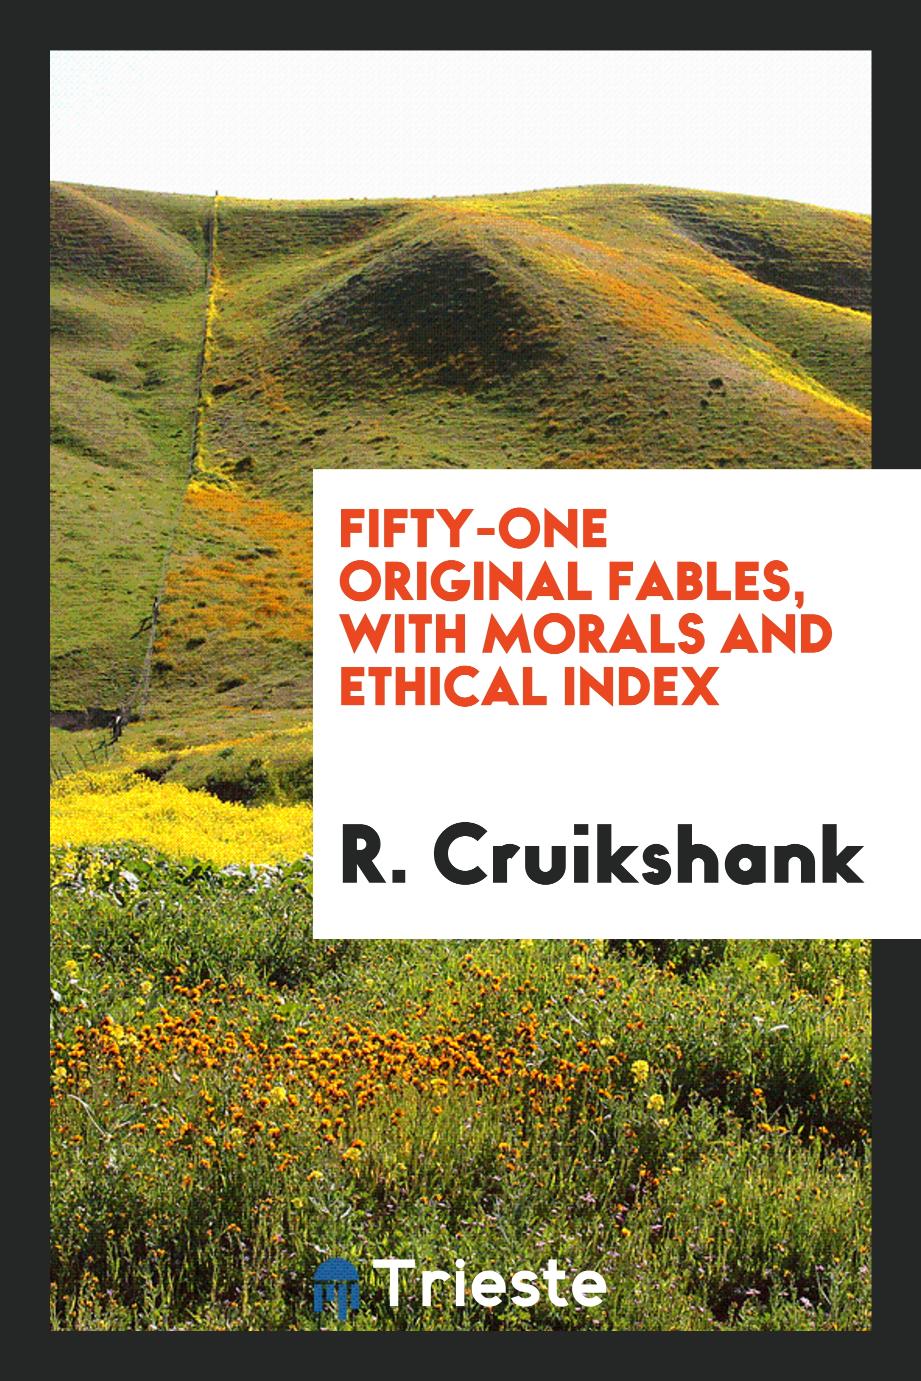 Fifty-one original fables, with morals and ethical index